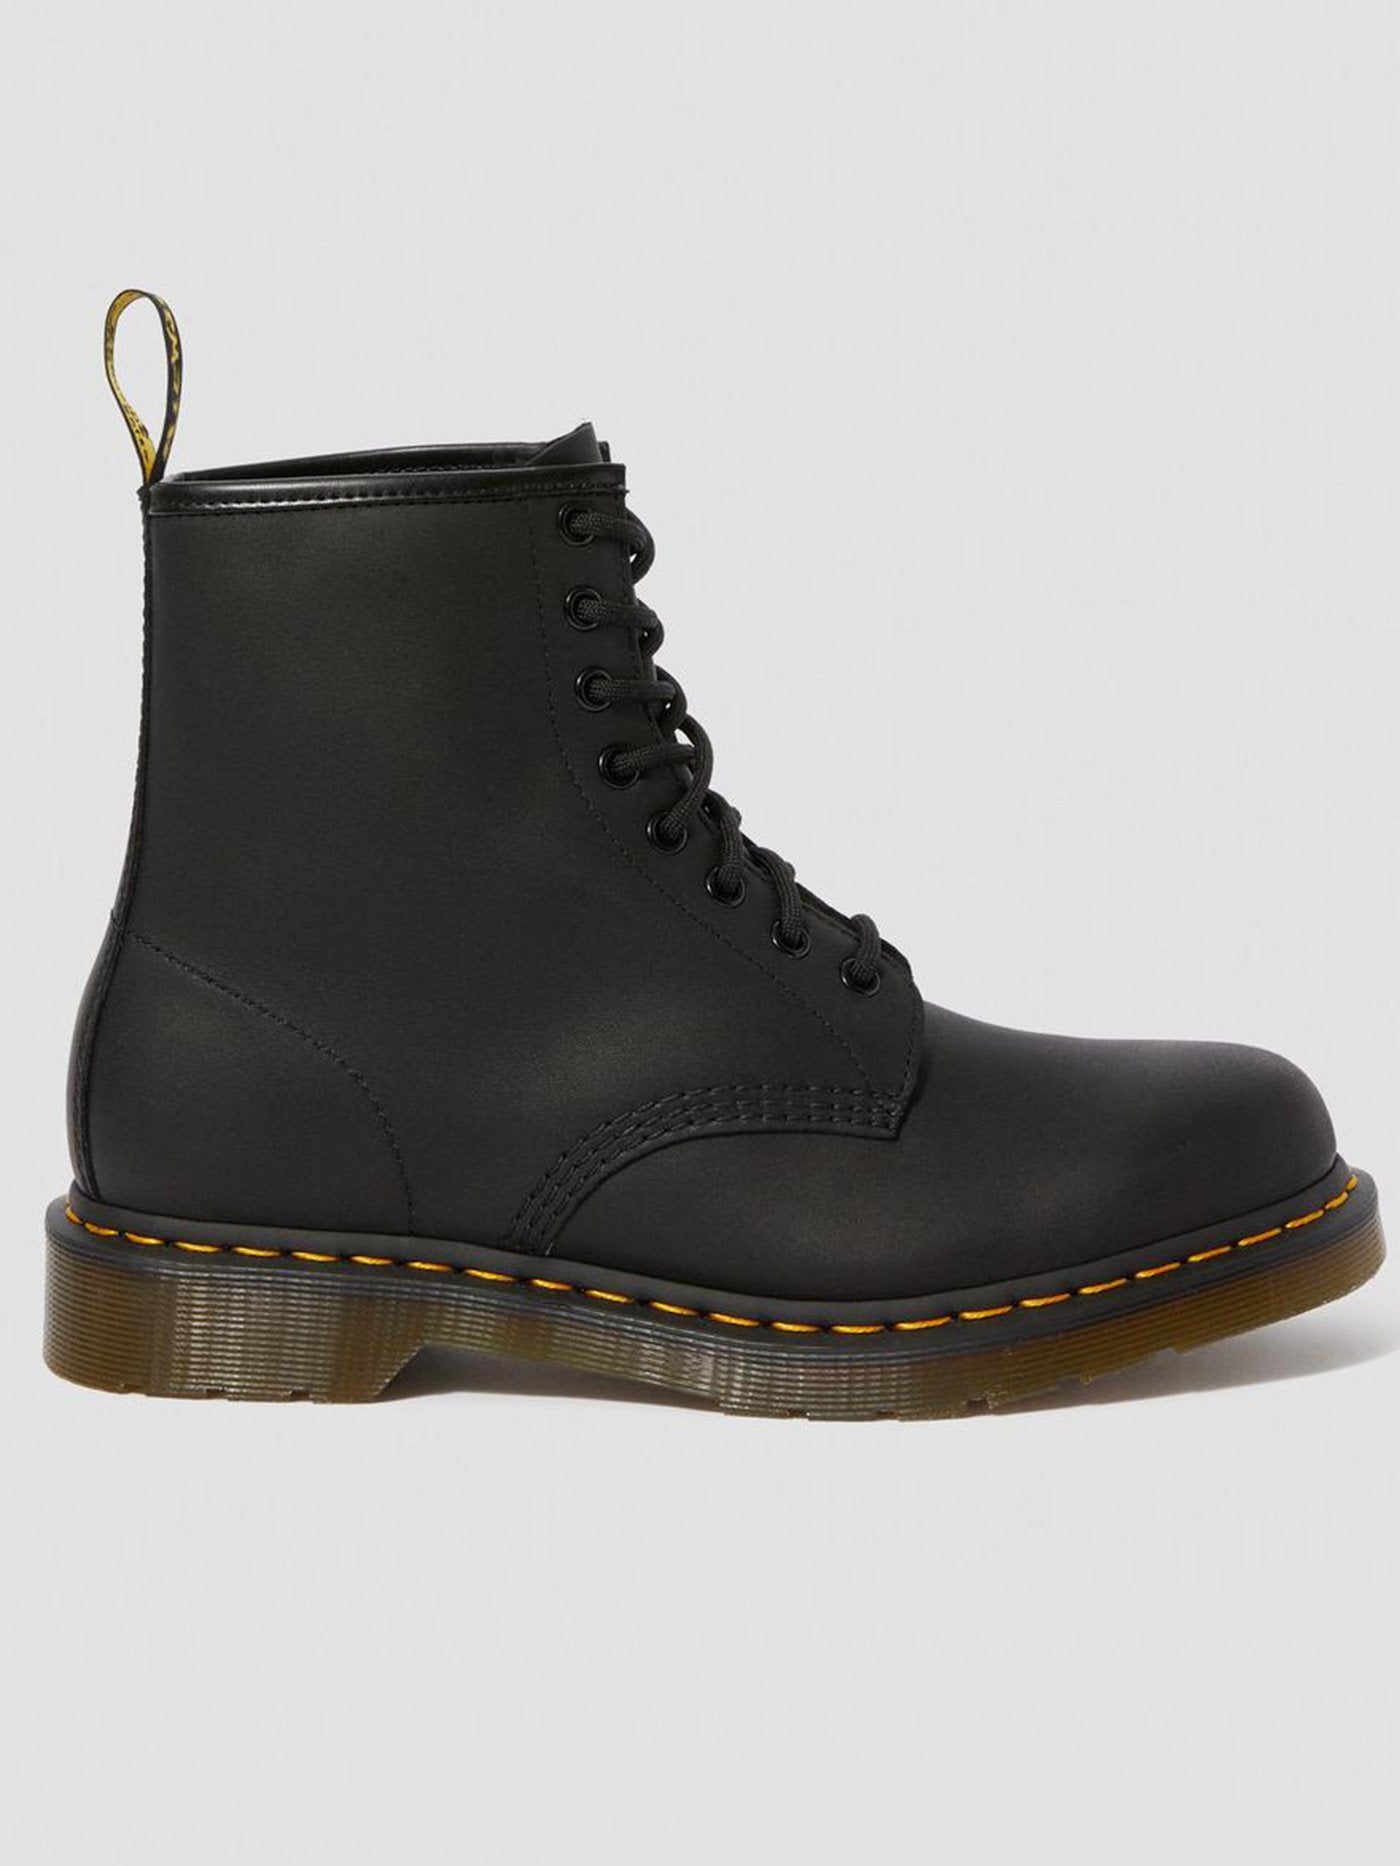 Dr Martens 1460 Black Greasy Boots